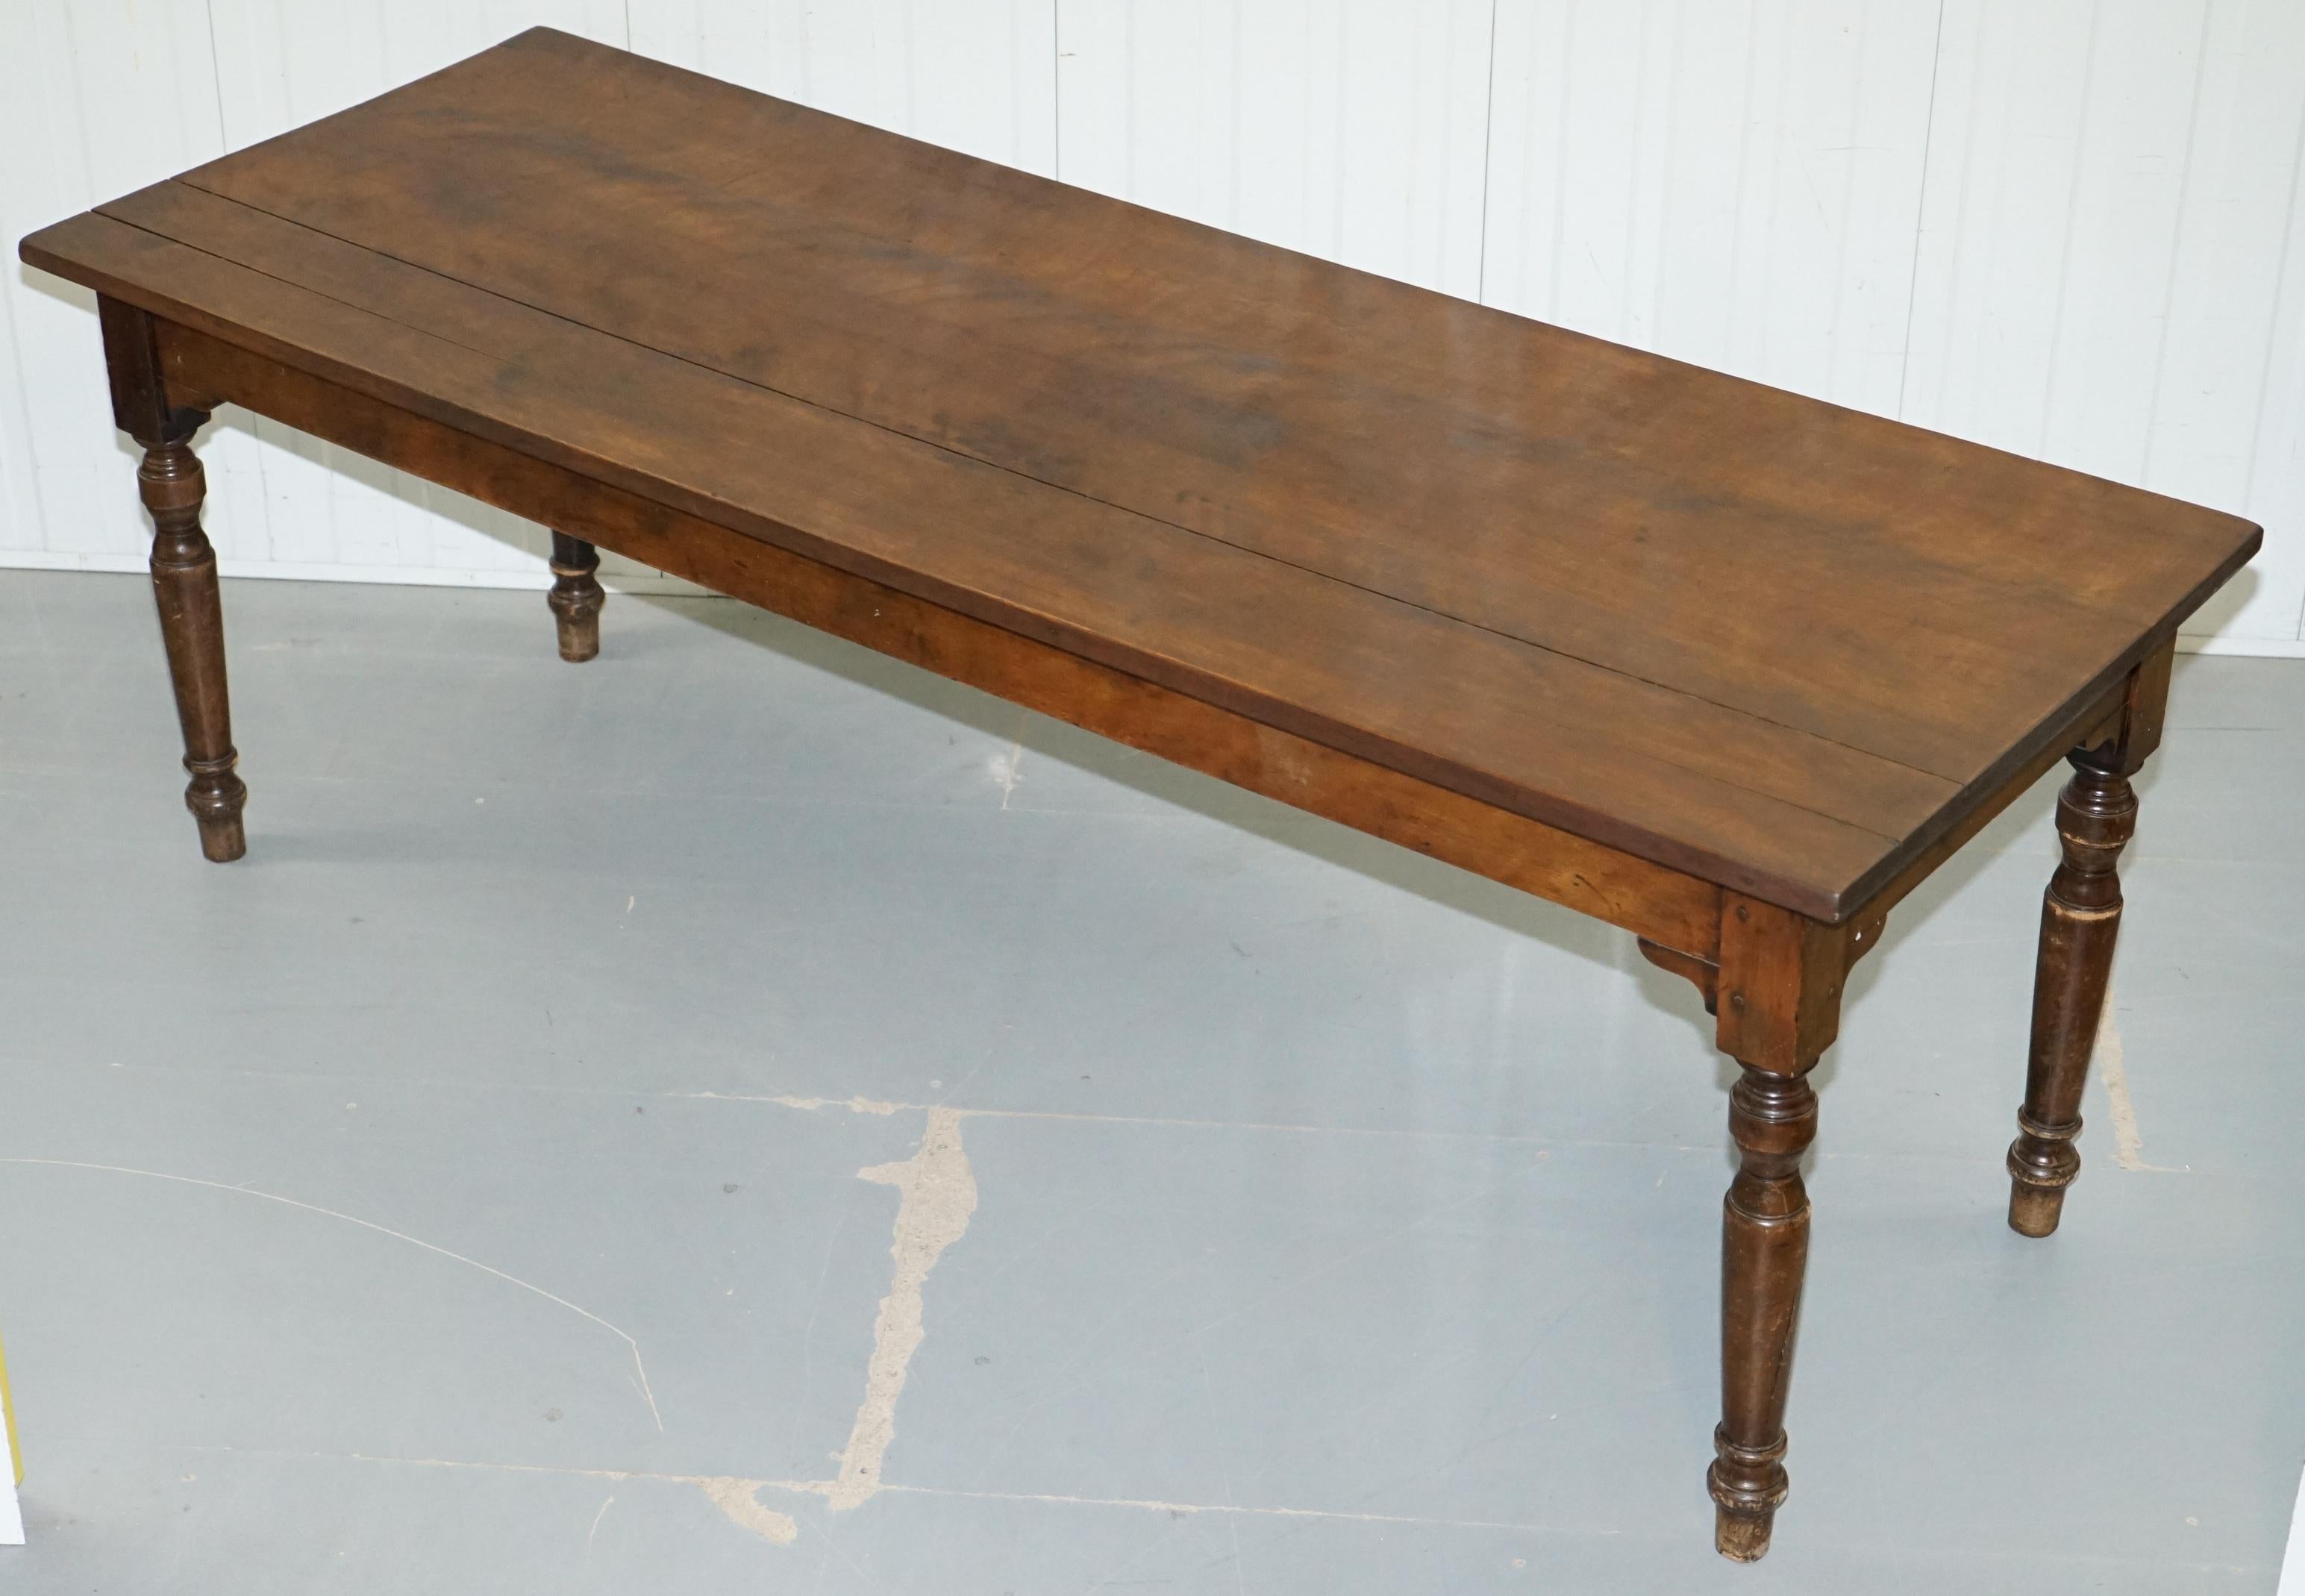 We are delighted to offer for sale this lovely mid-Victorian James Jas Shoolbred refectory dining table in solid walnut

A good looking functional and well made English refectory table from one of the finest cabinet makers our country has ever